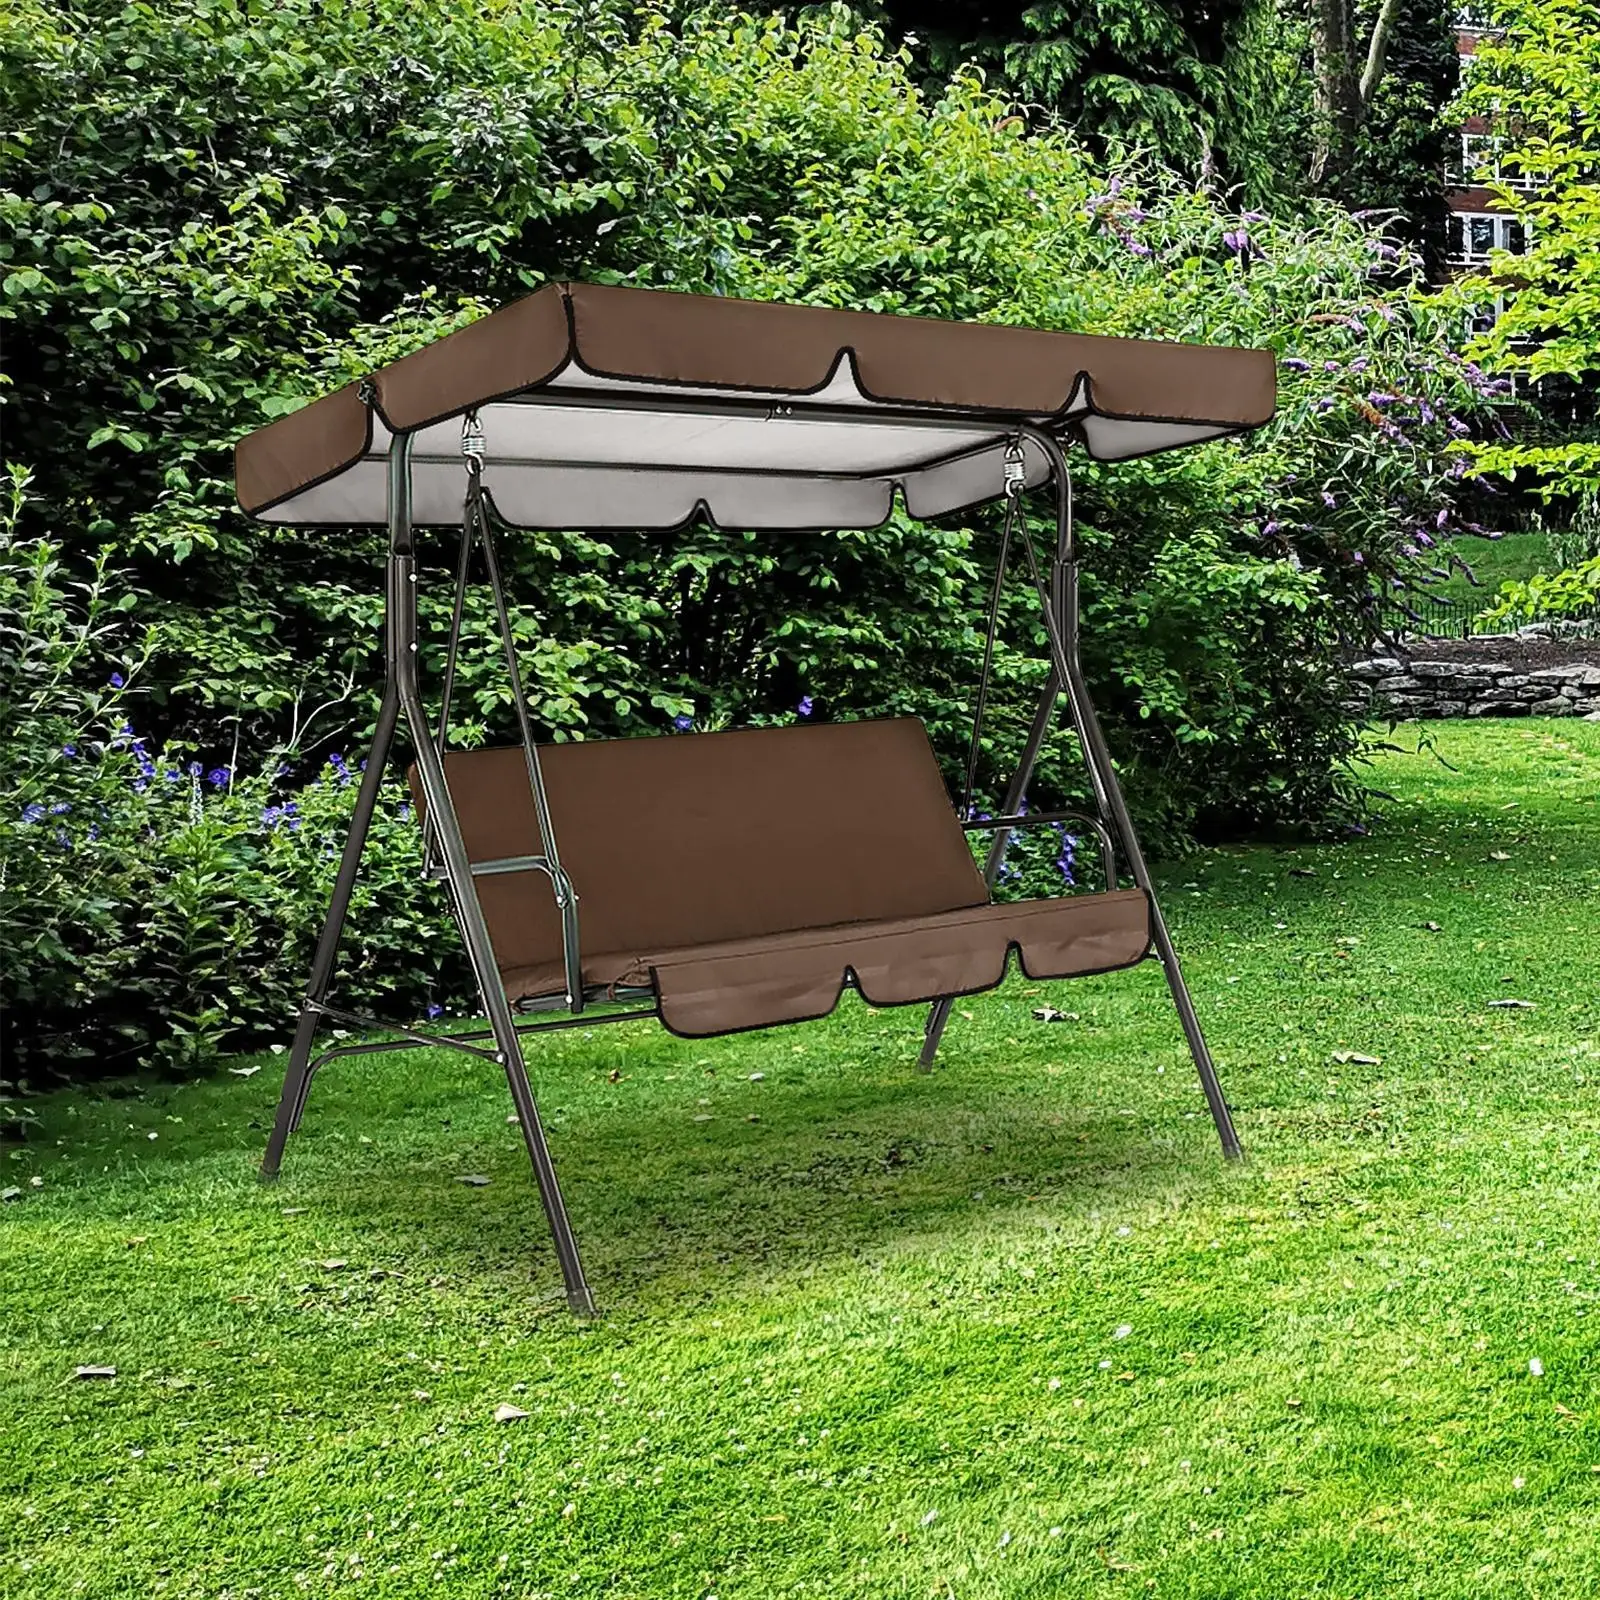 Swing Chair Canopy Replacement Swing Chair Dust Covers Outdoor Garden Furniture Covers Swing Seat Top Cover for Outdoor Patio